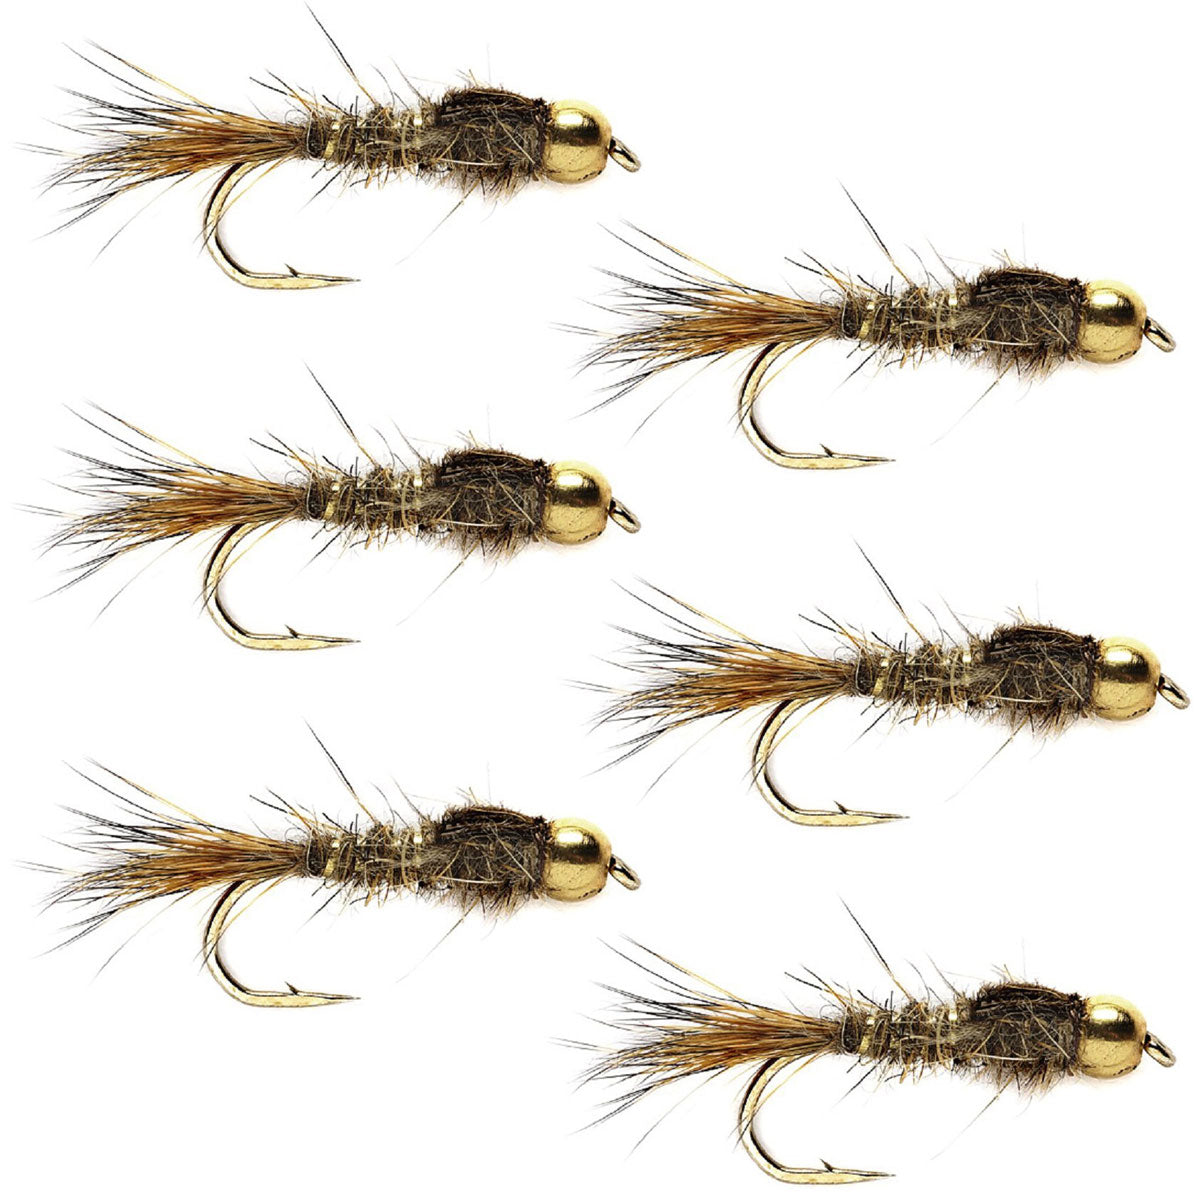 Bead Head Nymph Fly Fishing Flies - Gold Ribbed Hare's Ear Trout